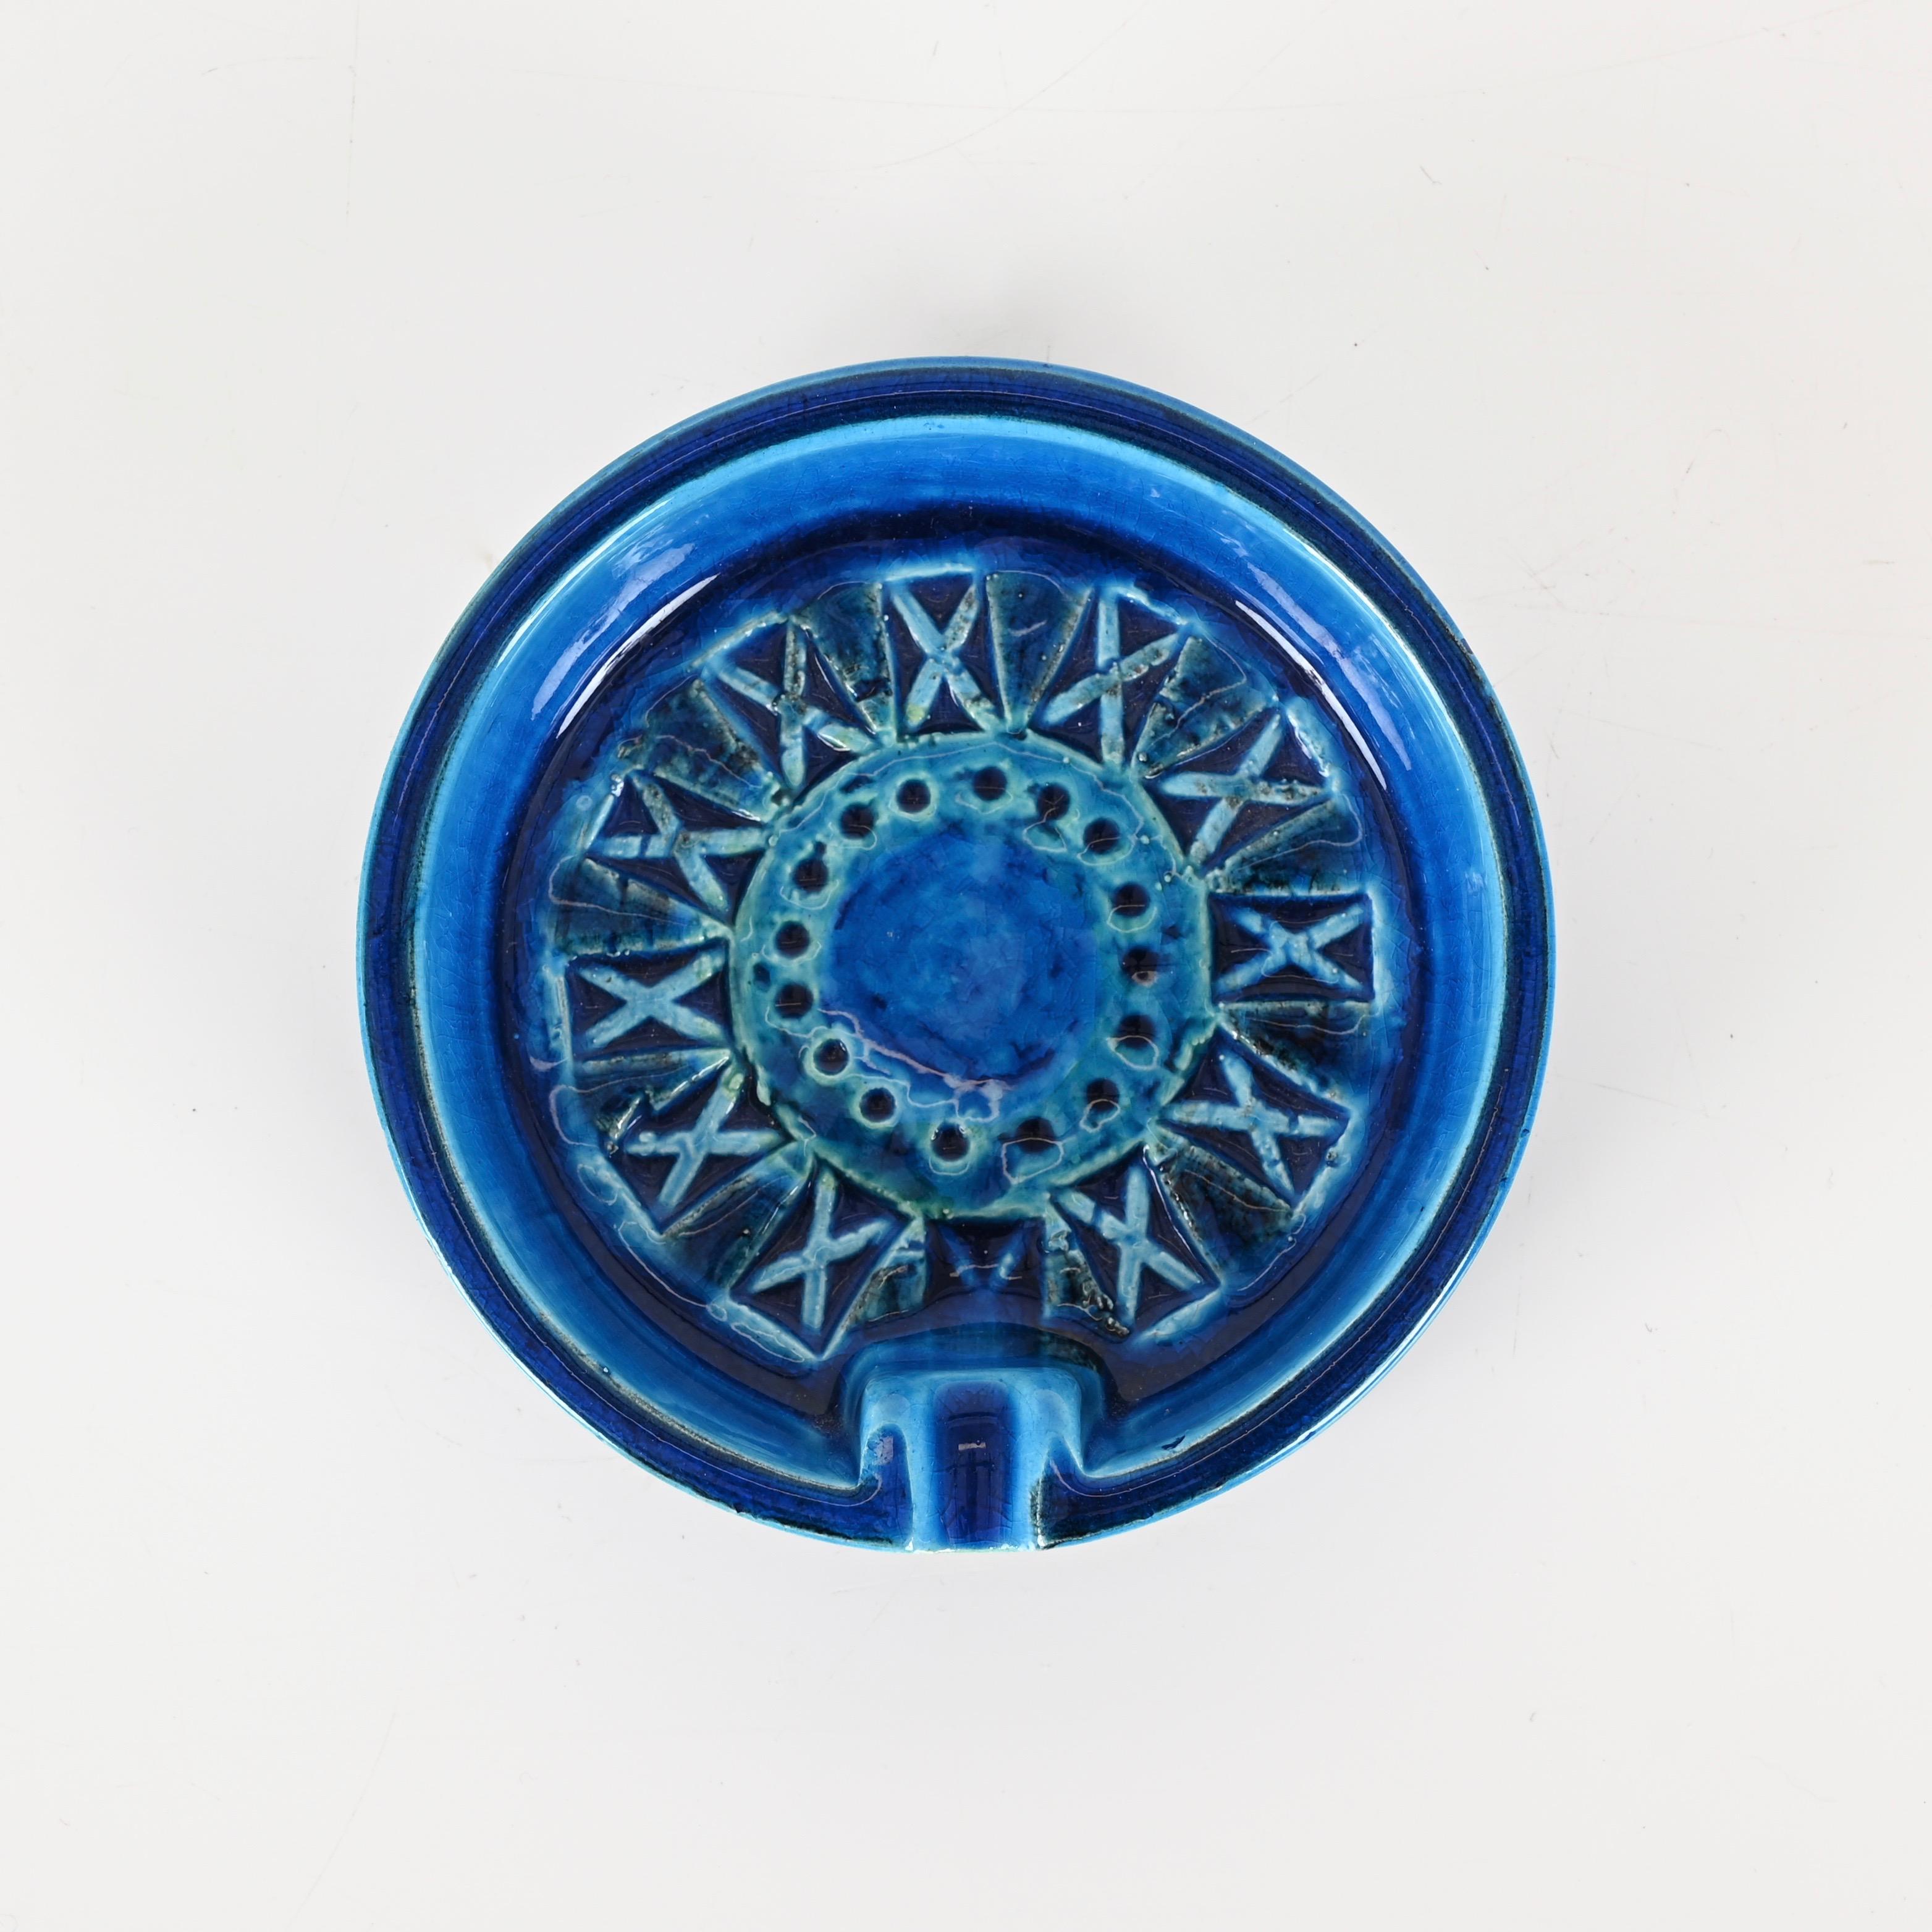 Original and signed Mid-Century ashtray in a fantastic vibrant blue glazed ceramic (Rimini Blu). This amazing  and rare piece is signed on the bottom and was designed by Flavia Montelupo and produced by Bitossi in Italy during 1960s. 

This lovely